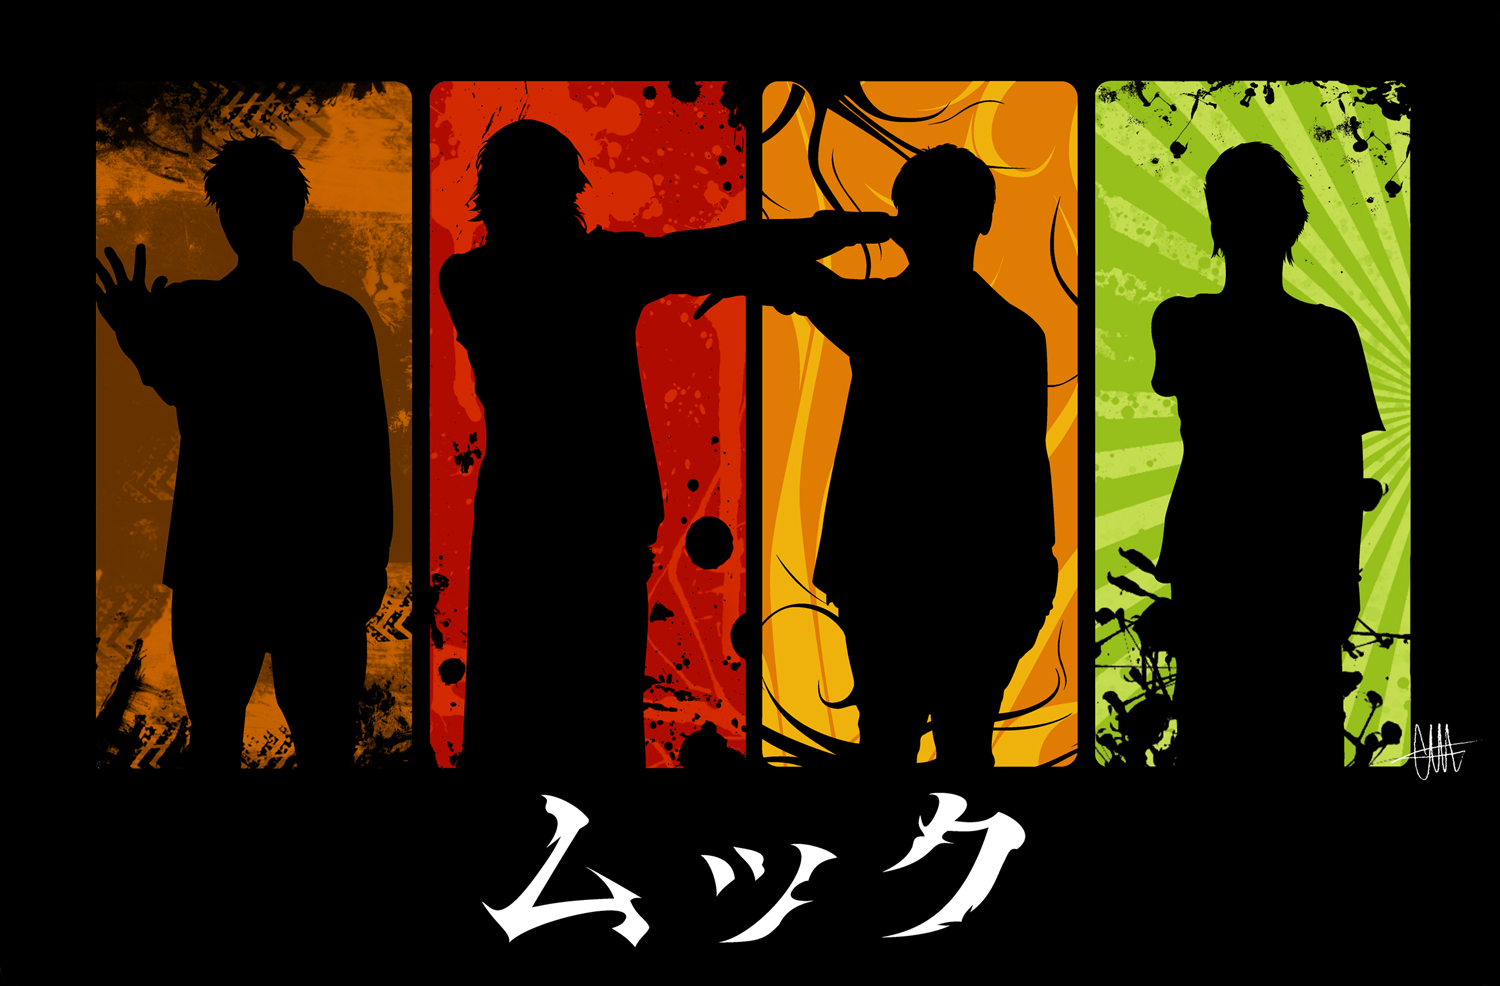 Mucc Silhouettes by Sway